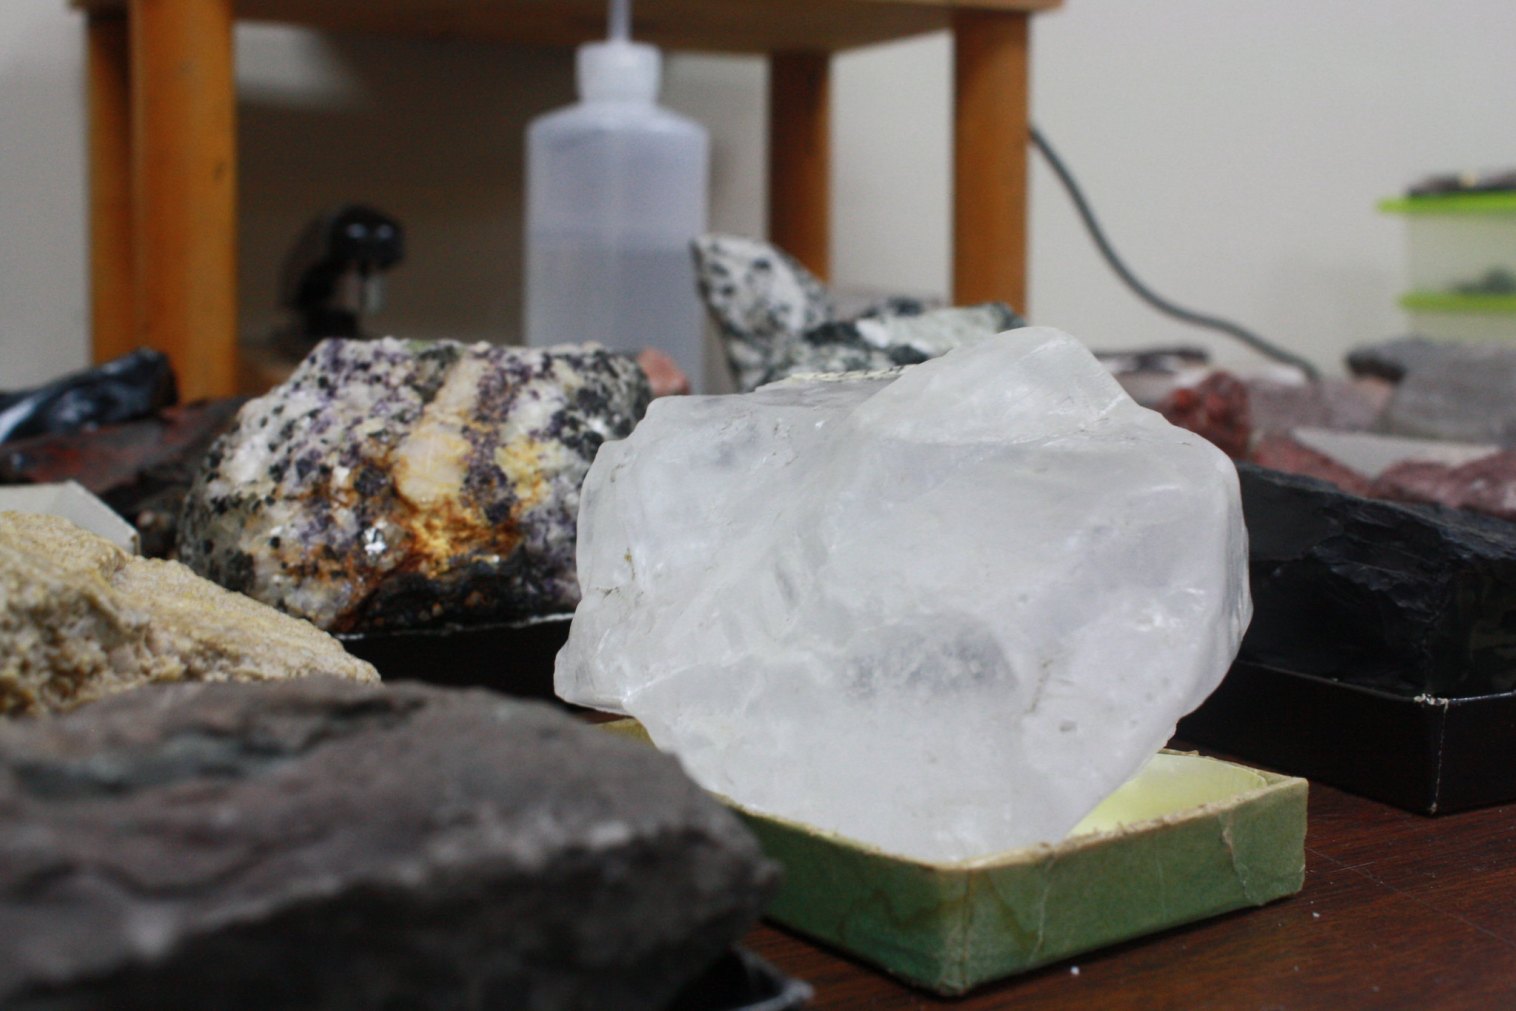 Samples used for a rock/mineral ID lab